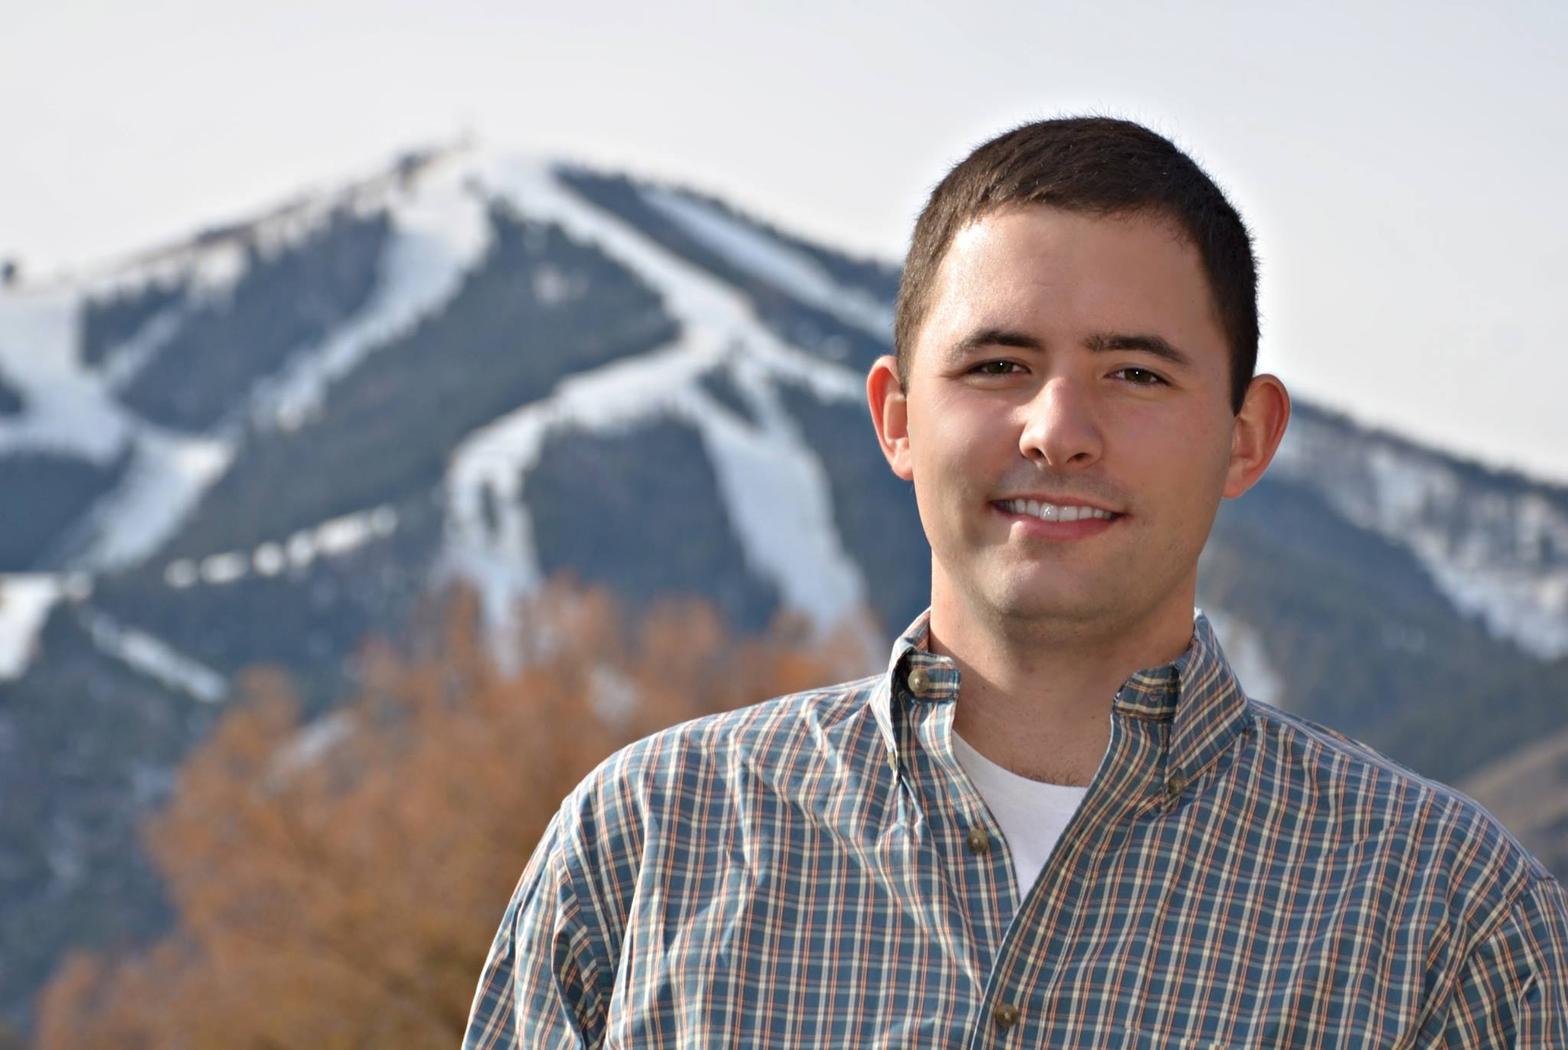 Ryan Goodman Blogs to Connect Farmers and Ranchers with Consumers